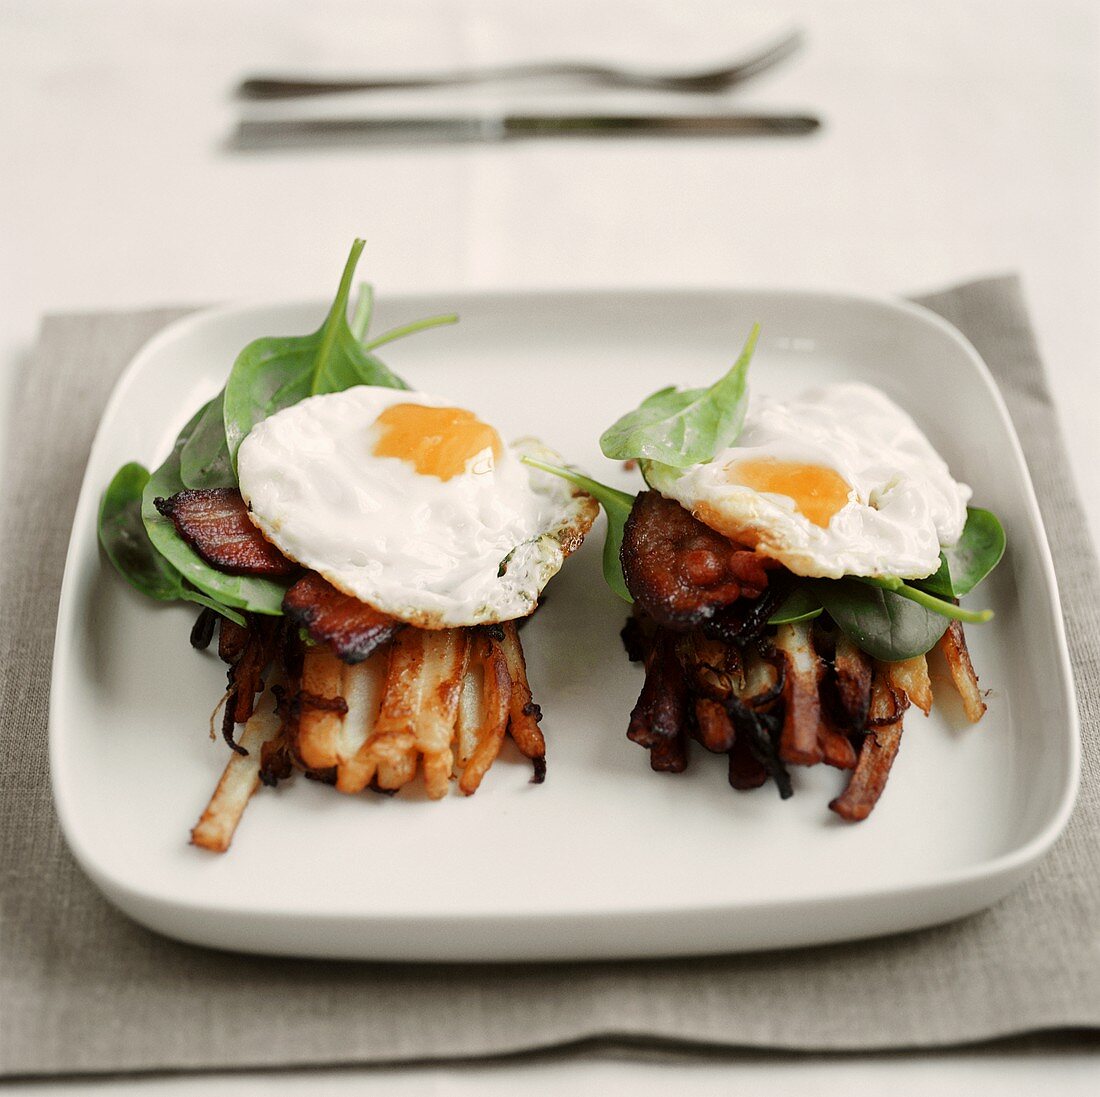 Fried egg with bacon and spinach on potato sticks